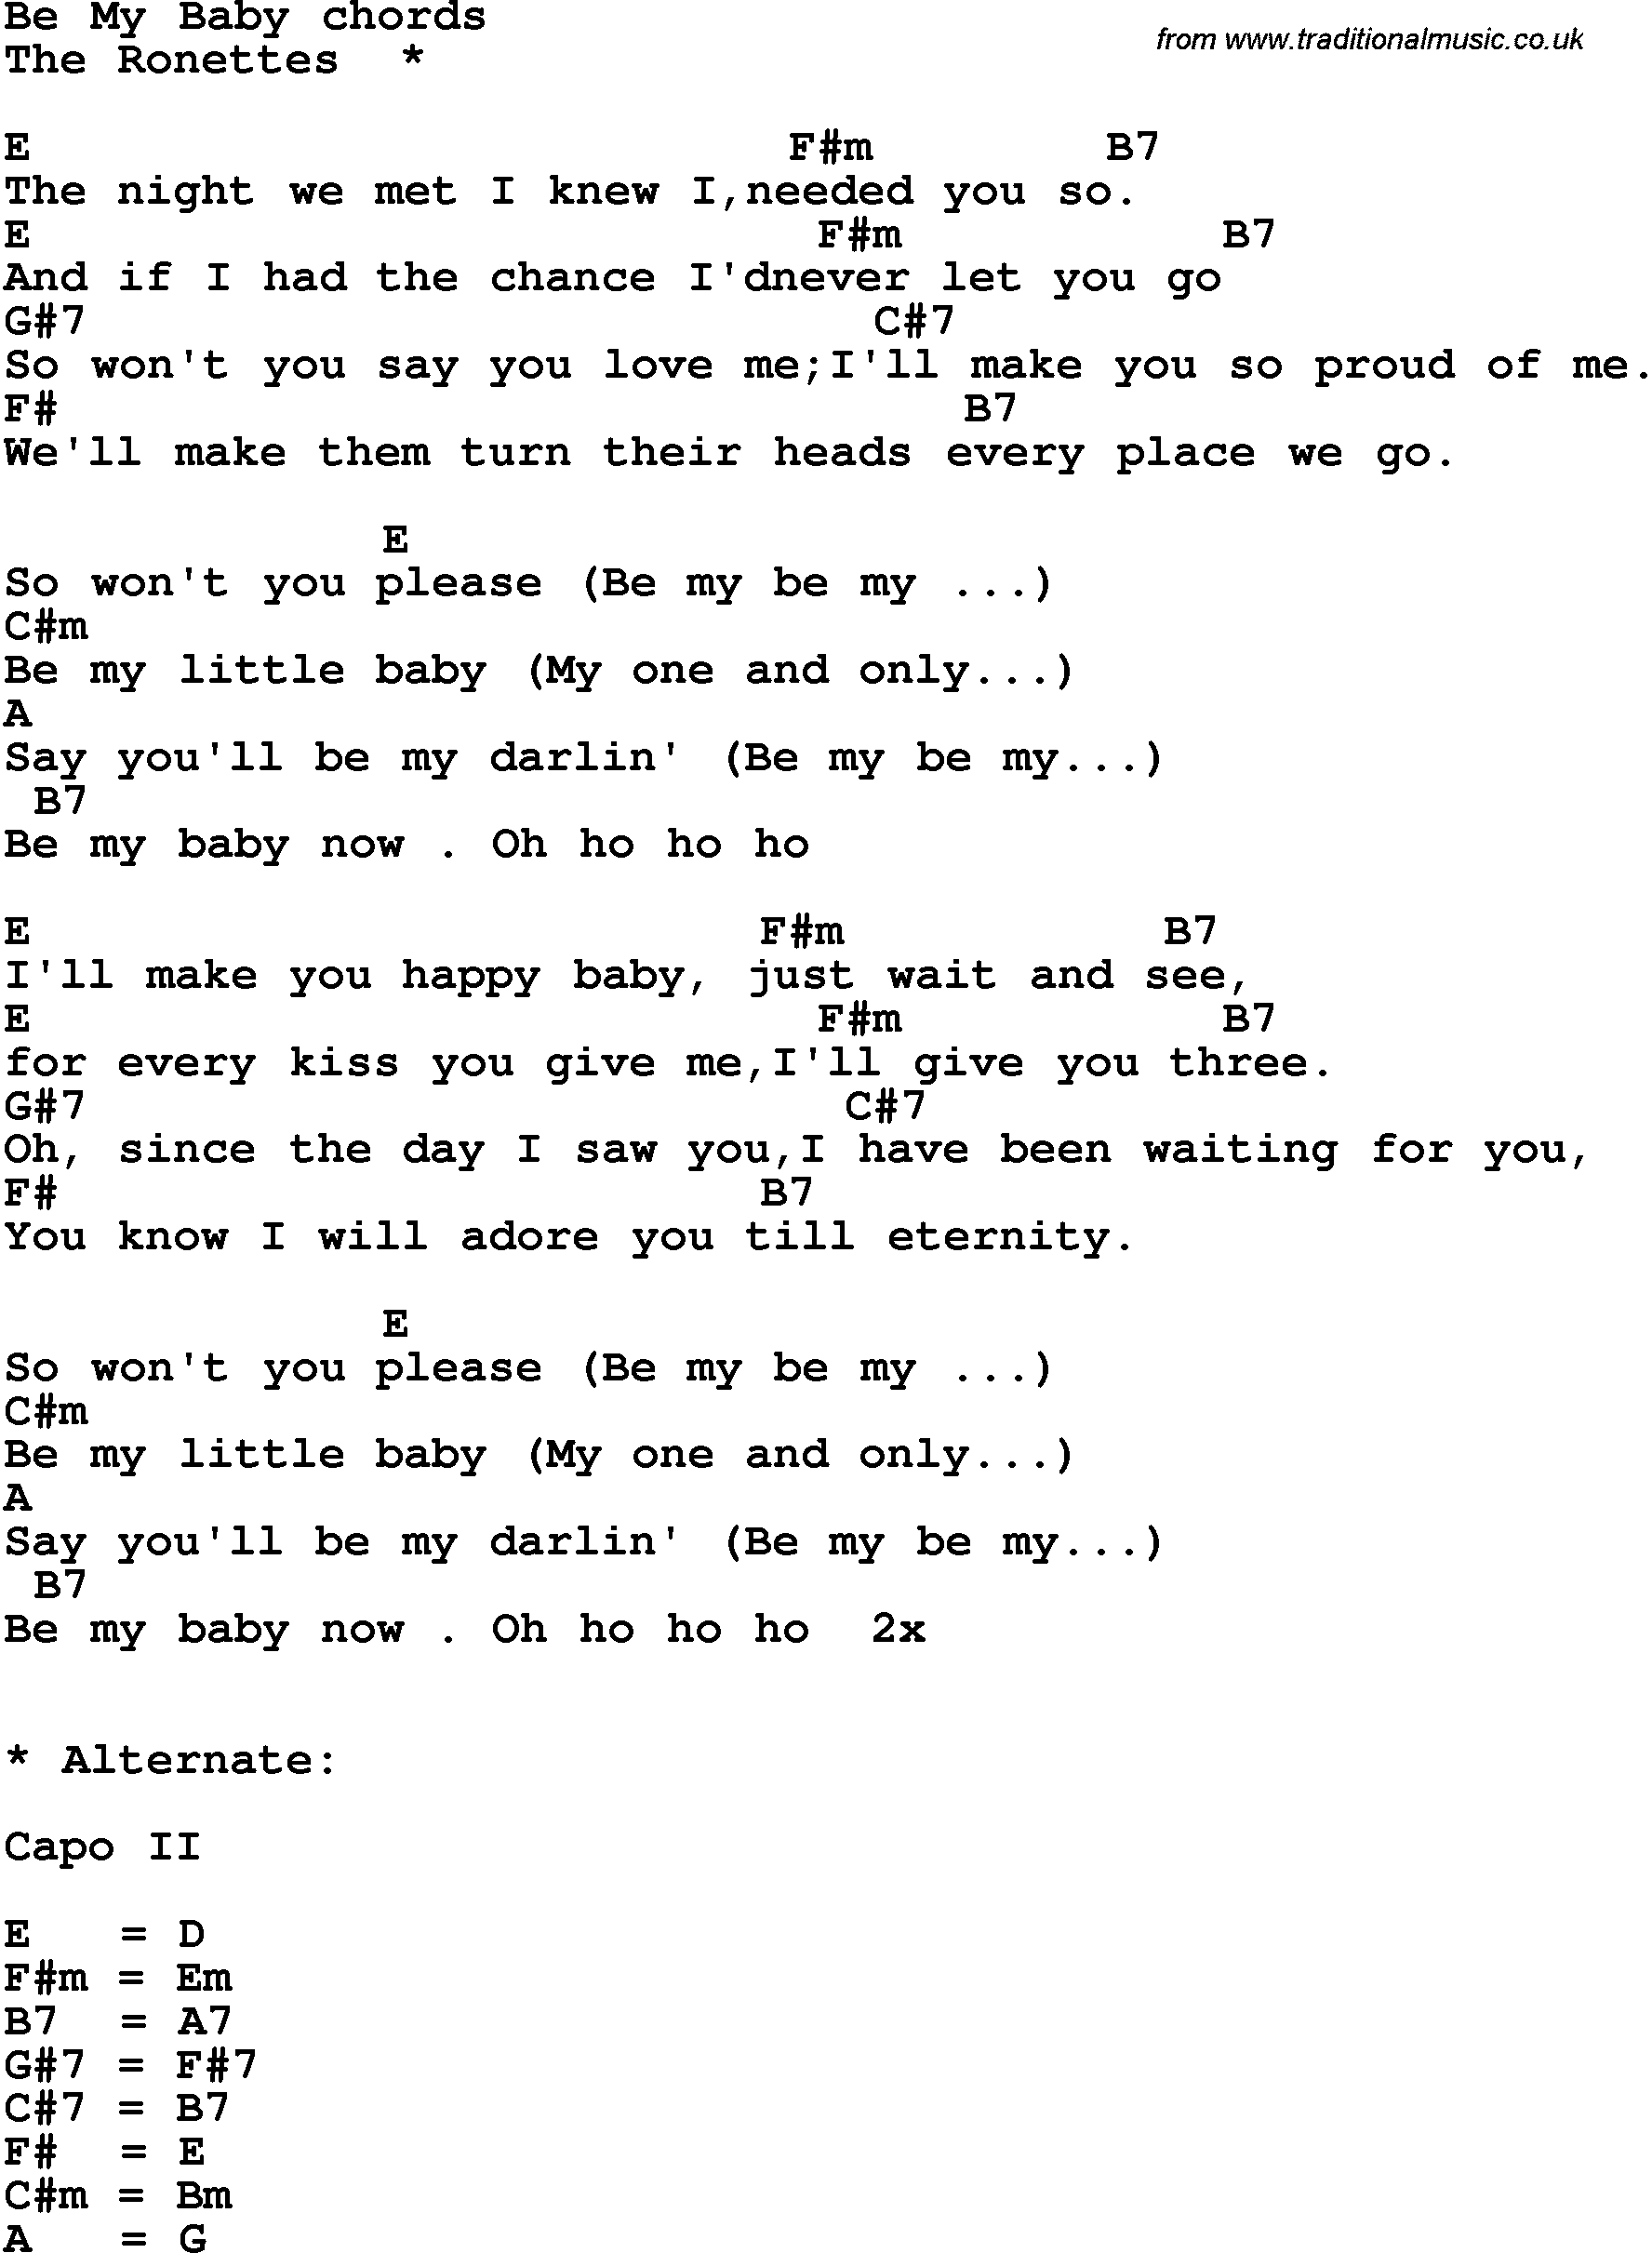 Song Lyrics with guitar chords for Be My Baby